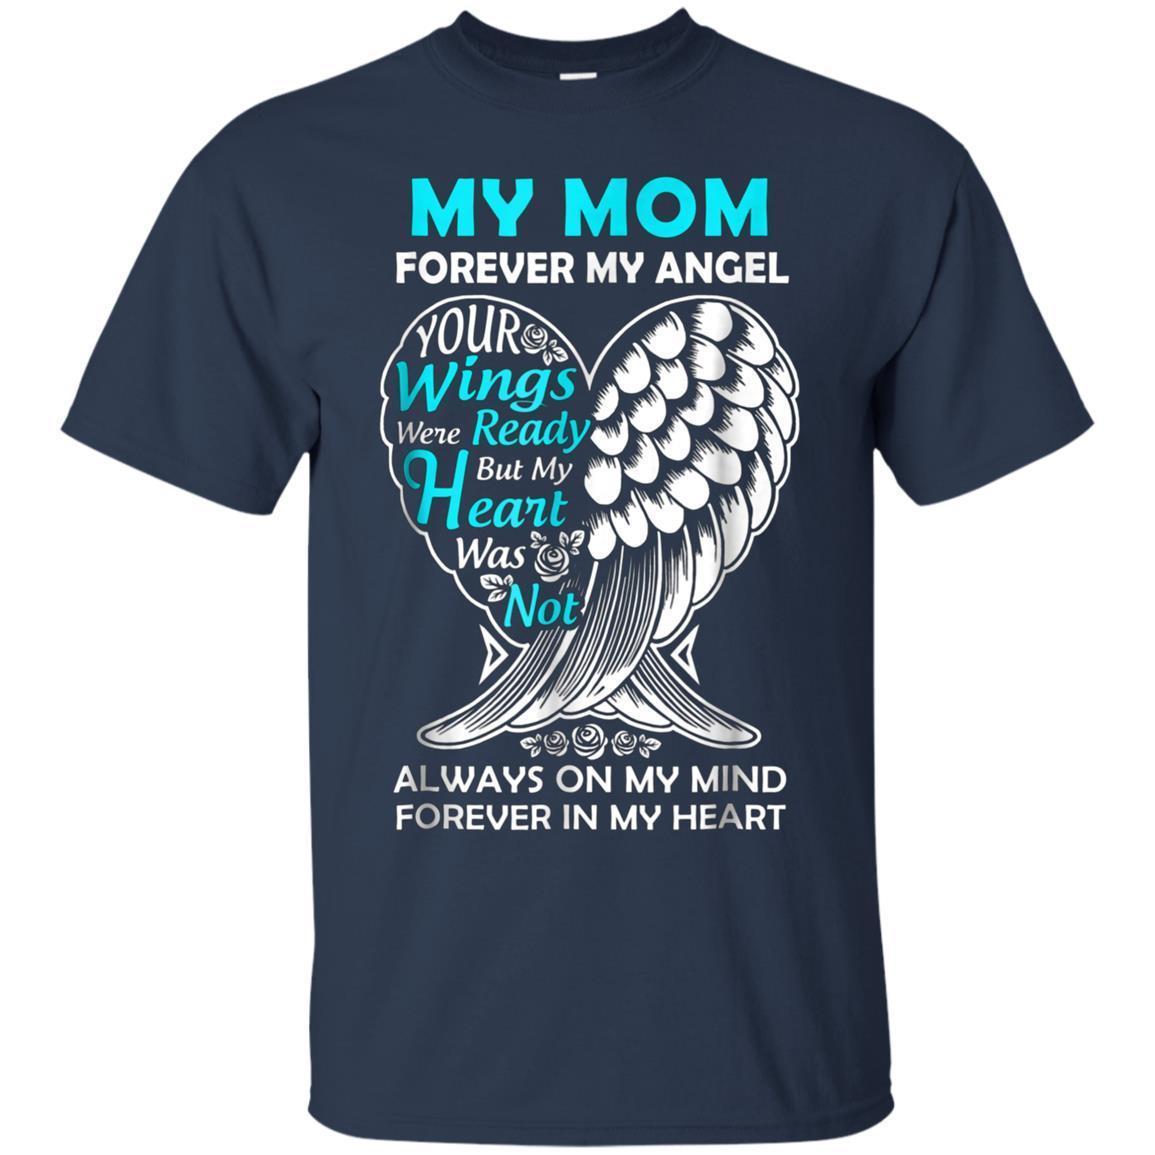 Mom In Heaven Forever My Angel – In Memory T Shirt funny shirts, gift ...